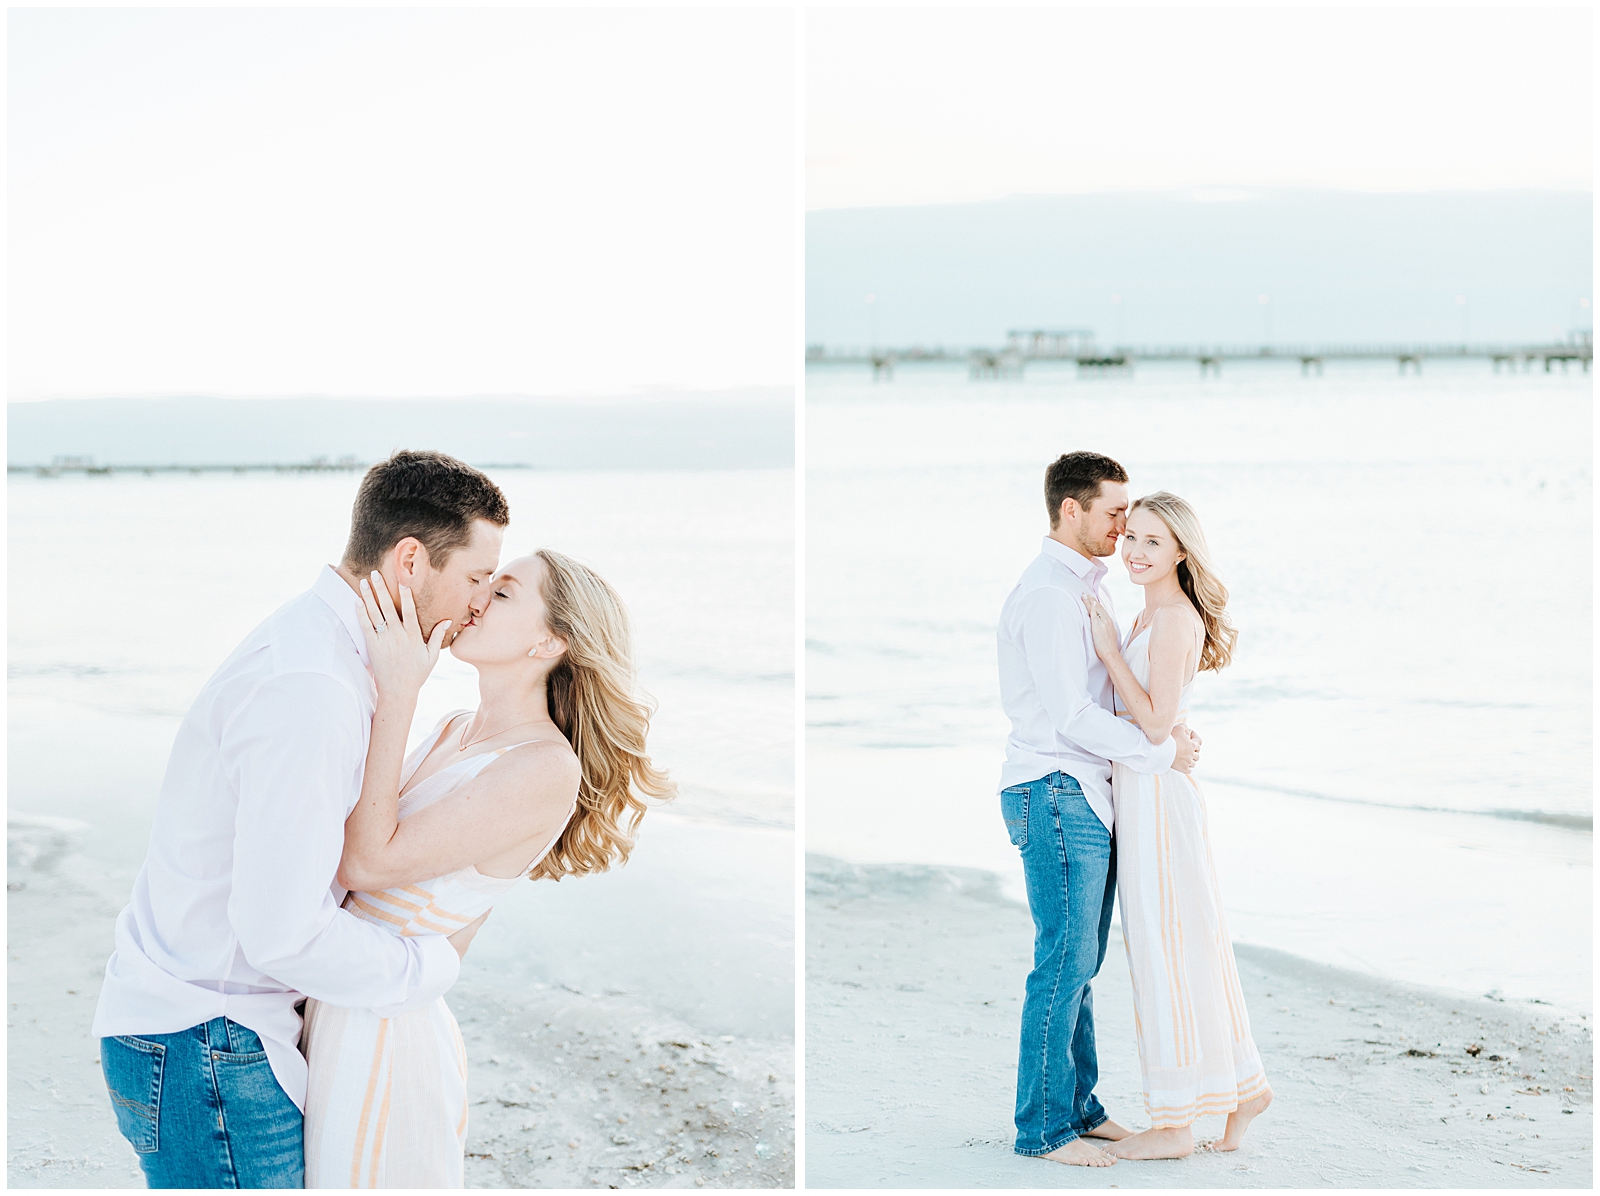 Fort Desoto Park Engagement Session on the beach